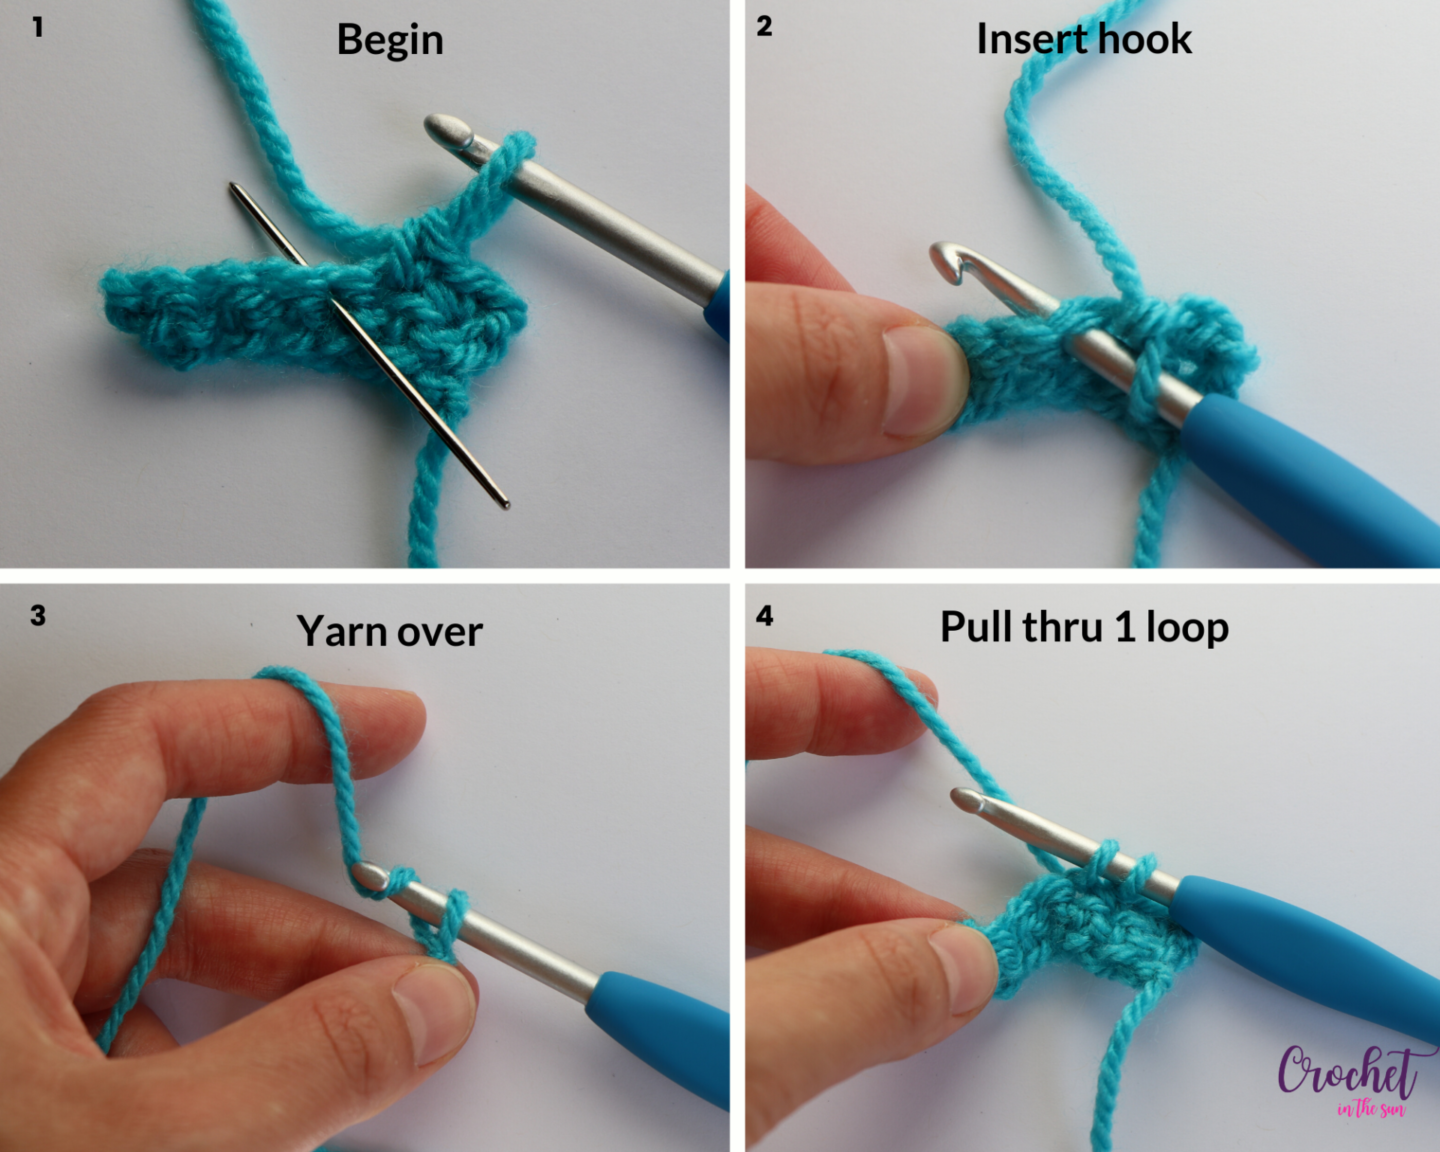 How to crochet - Step by step photo tutorial for the single crochet stitch (sc) steps 1-4. Beginner friendly tutorial. Part of the Ultimate Beginner's Guide to crochet #howtocrochet #crochetforbeginners